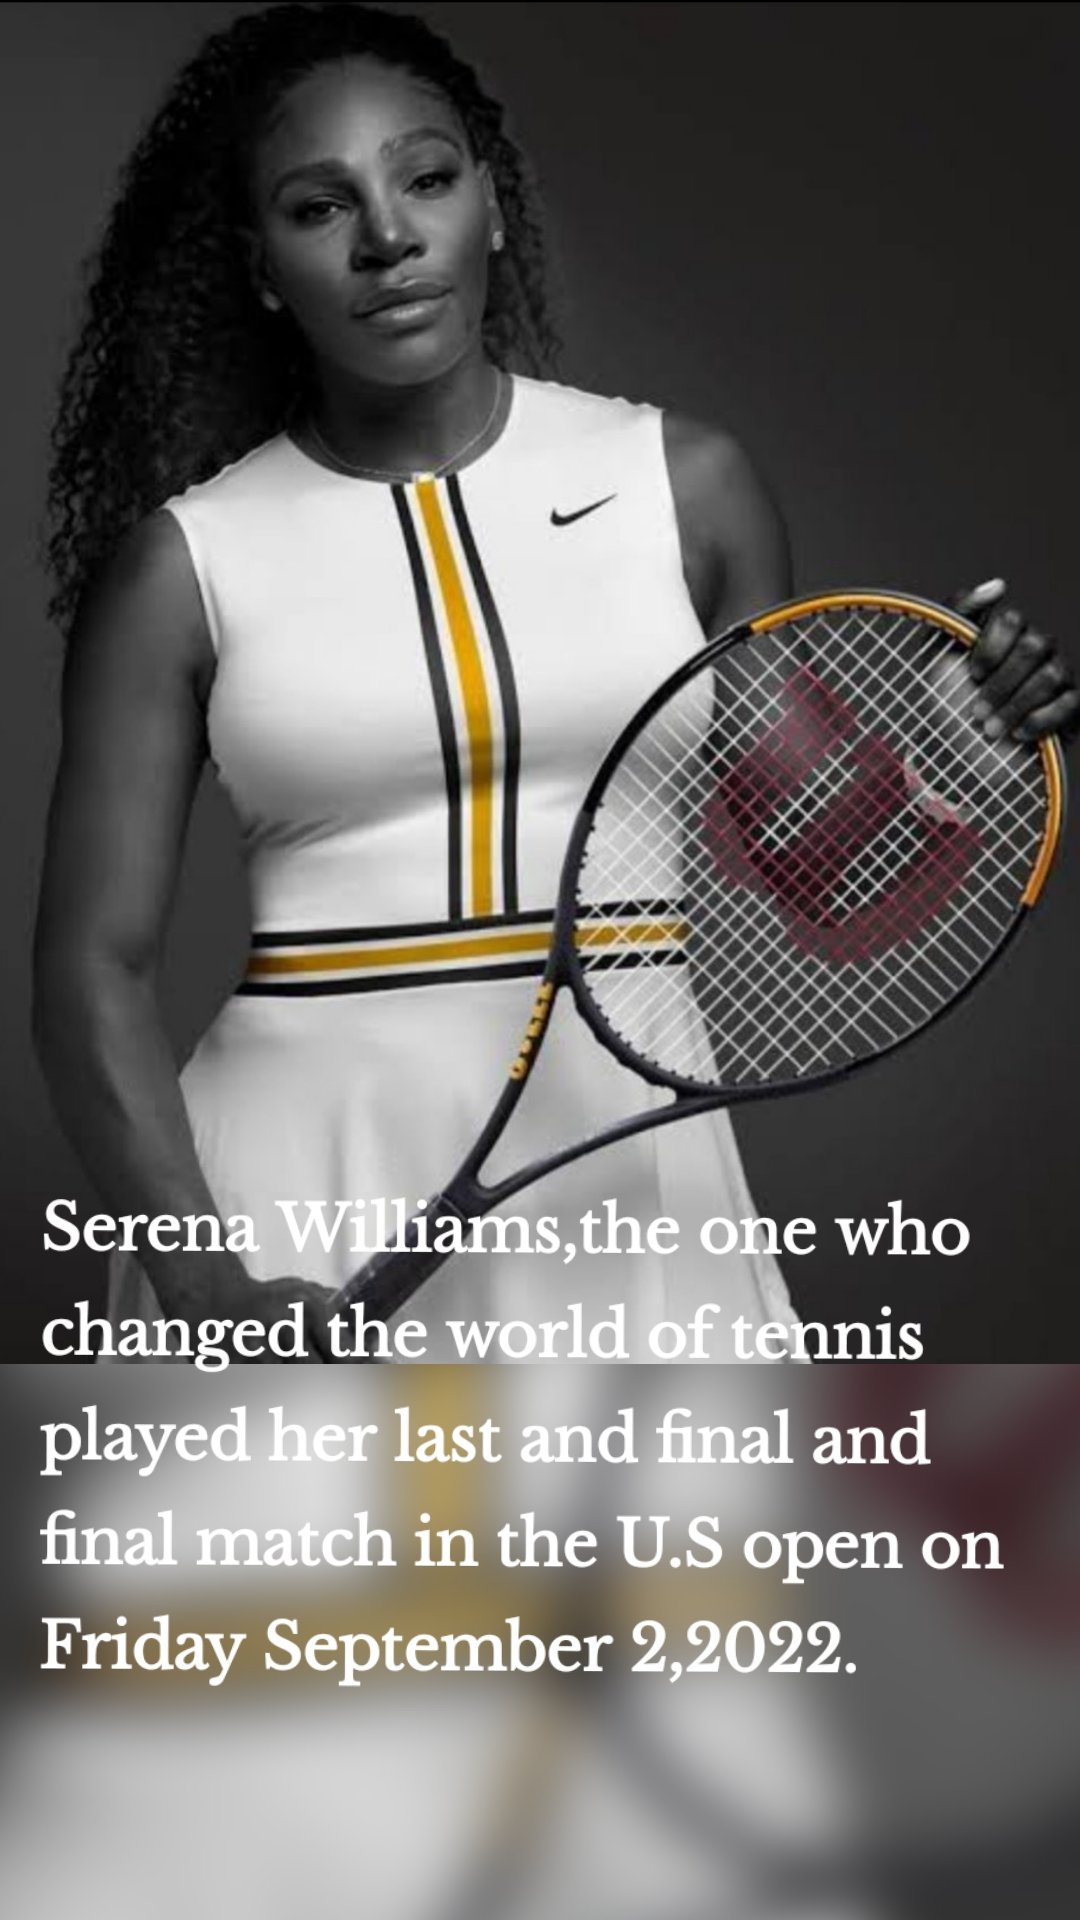 Serena Williams,the one who changed the world of tennis played her last and final and final match in the U.S open on Friday September 2,2022.